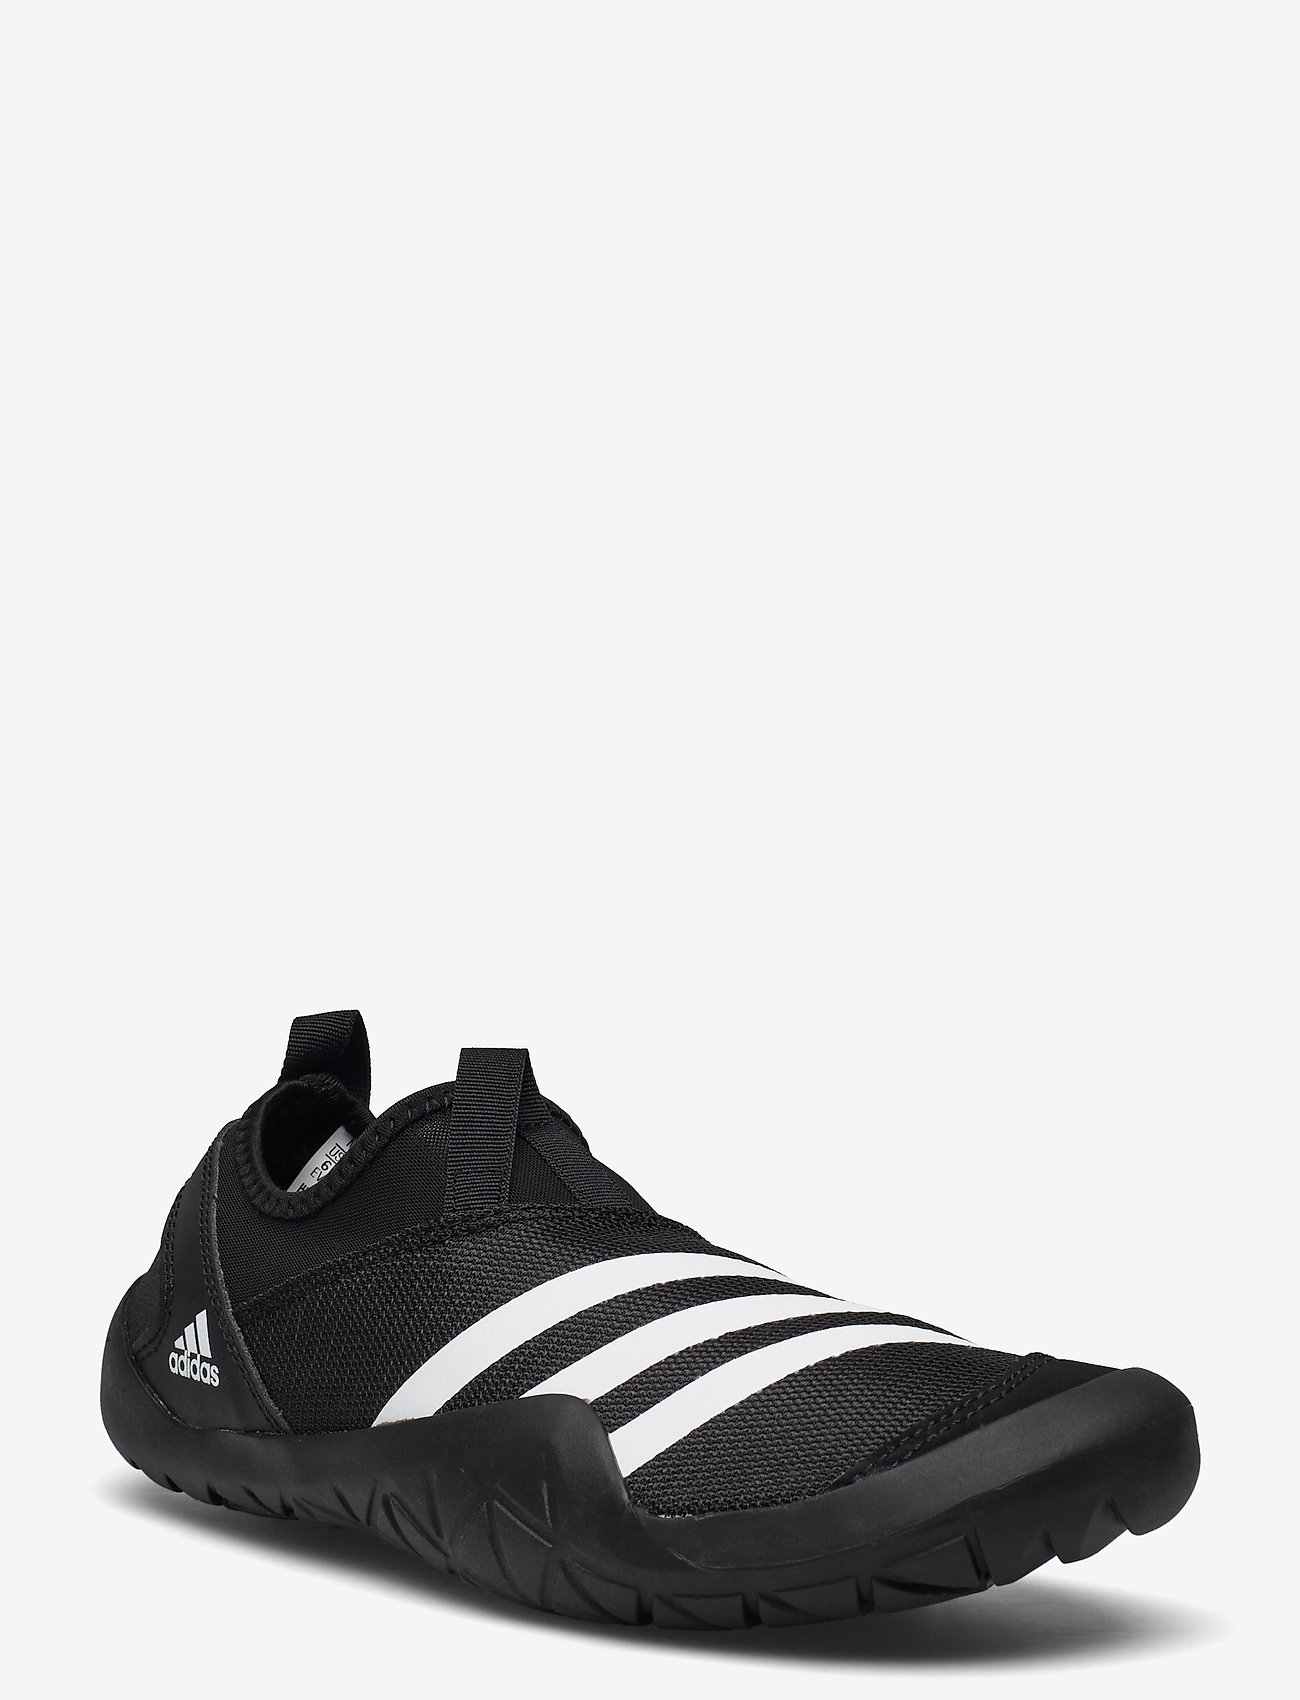 adidas slip on rubber shoes